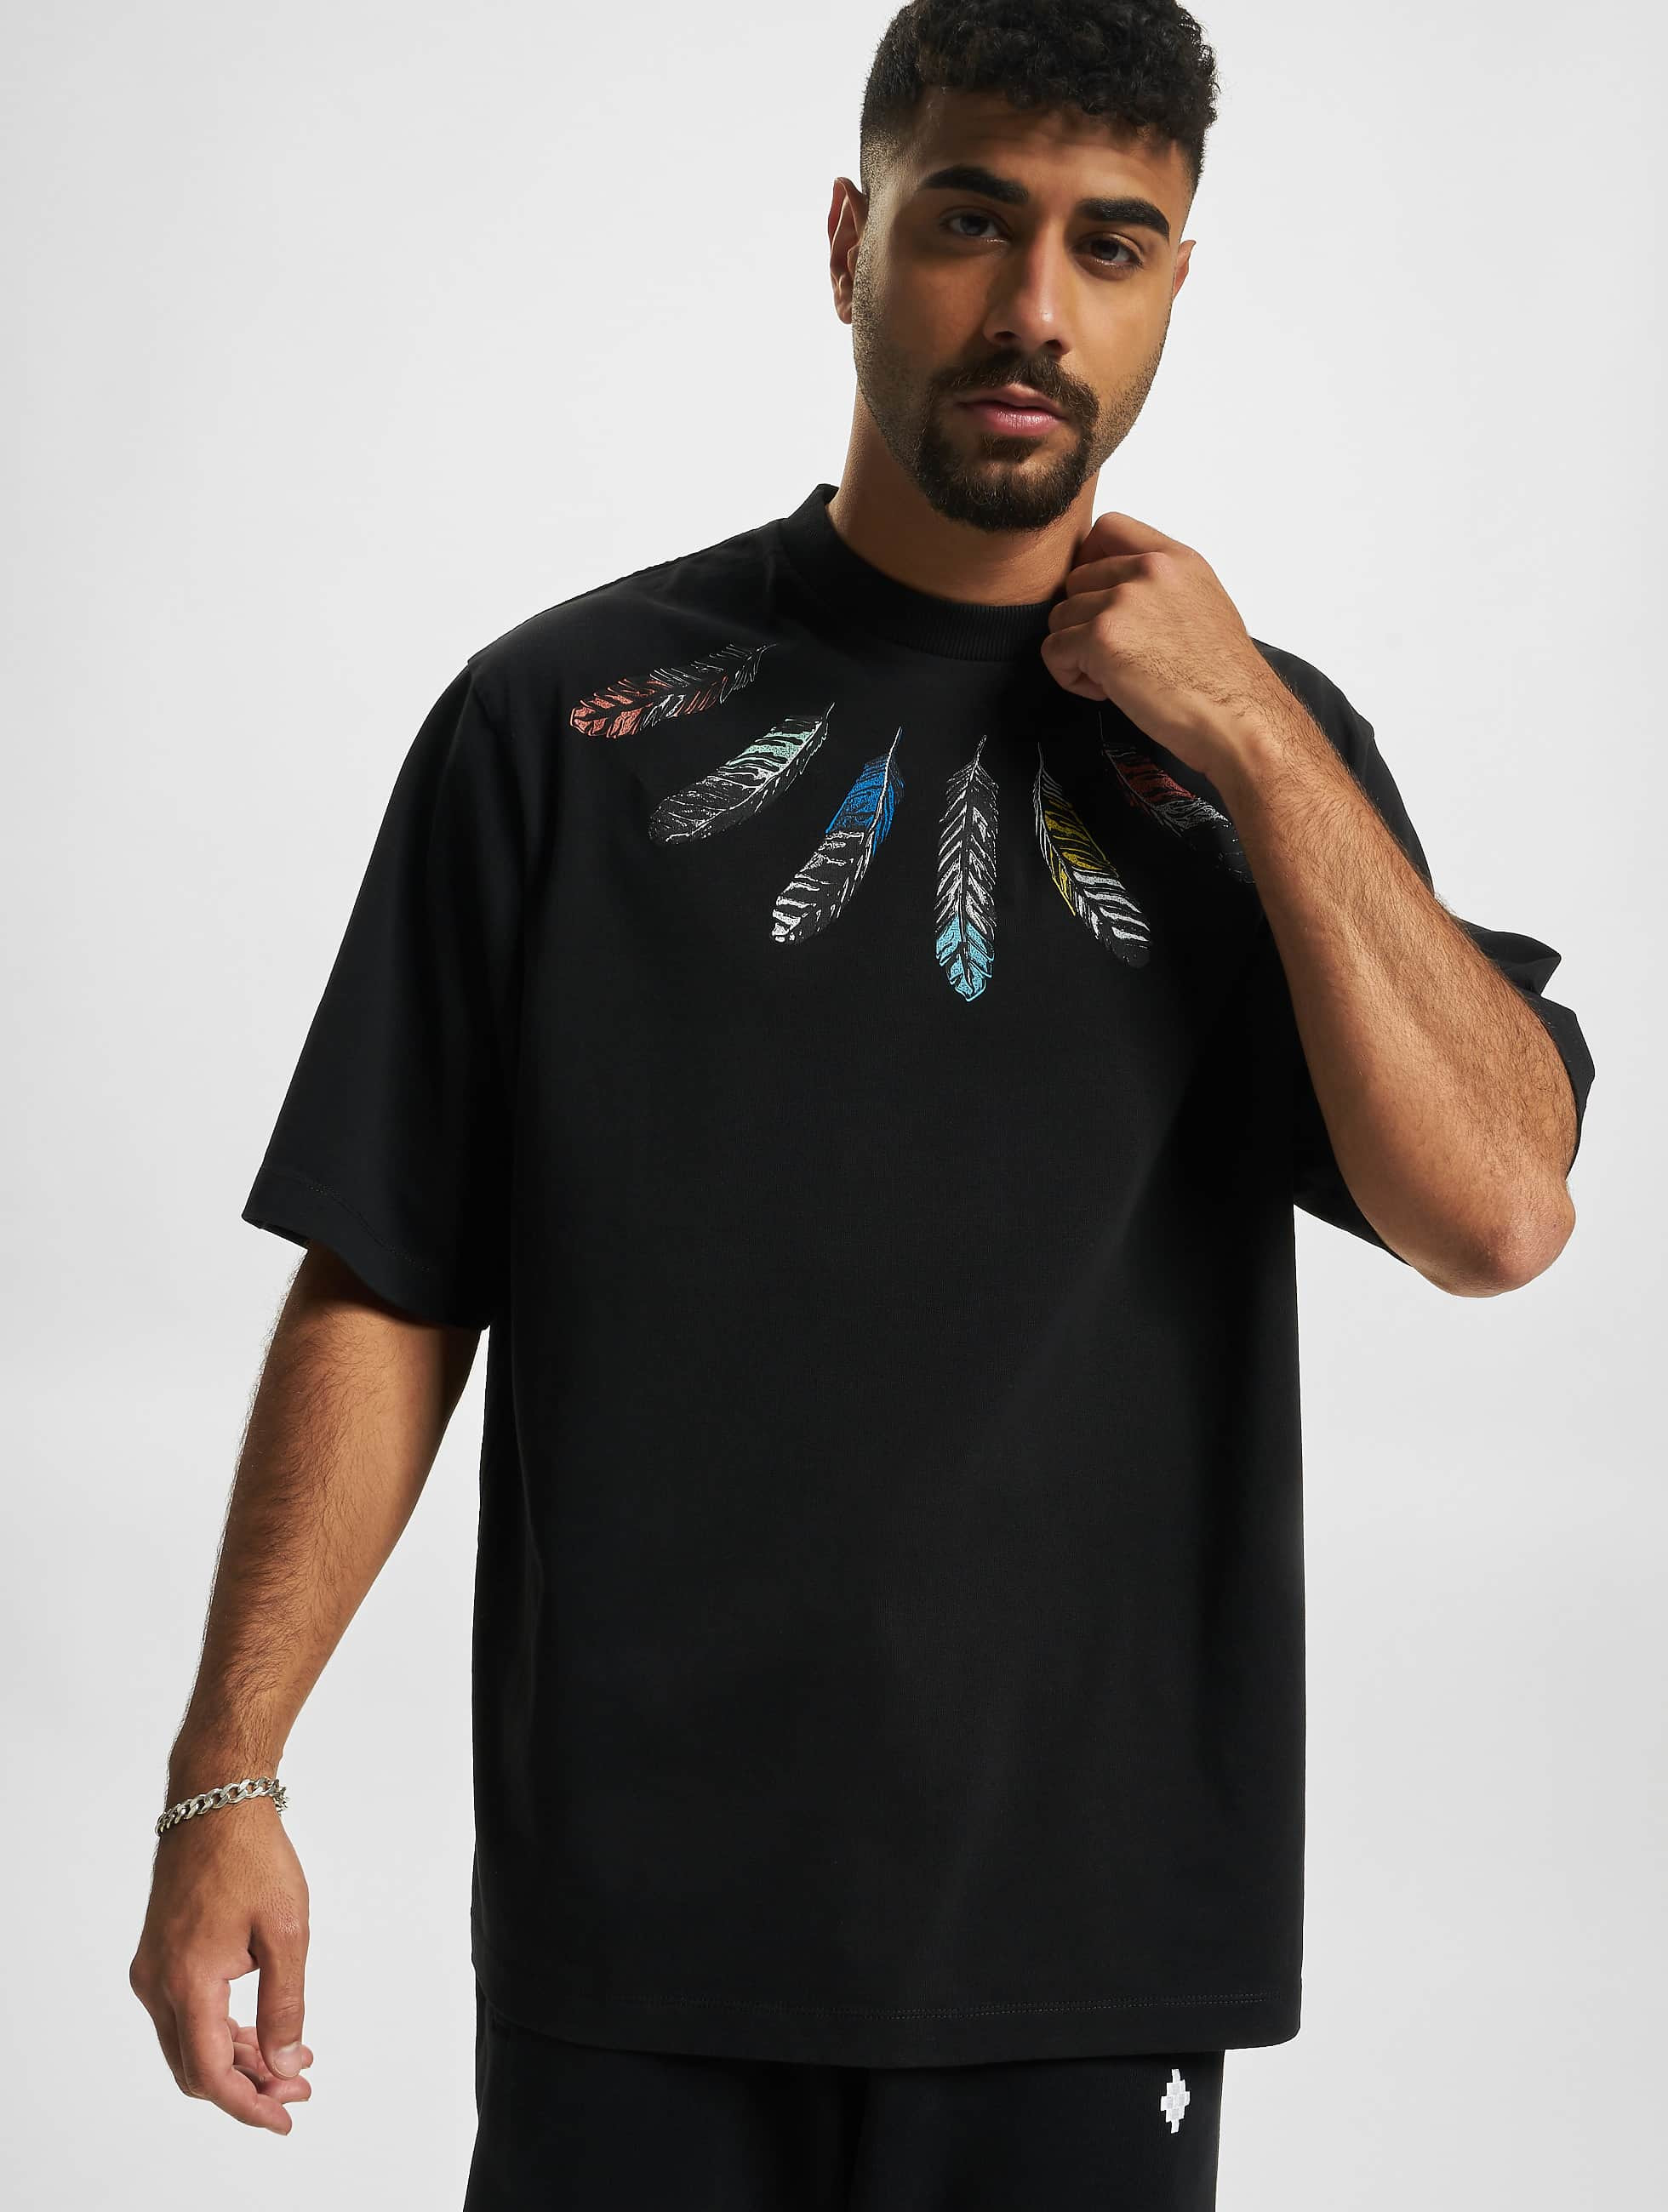 overdraw skam Tranquility Marcelo Burlon Overdel / T-shirts Collar Feathers Over i sort 954901